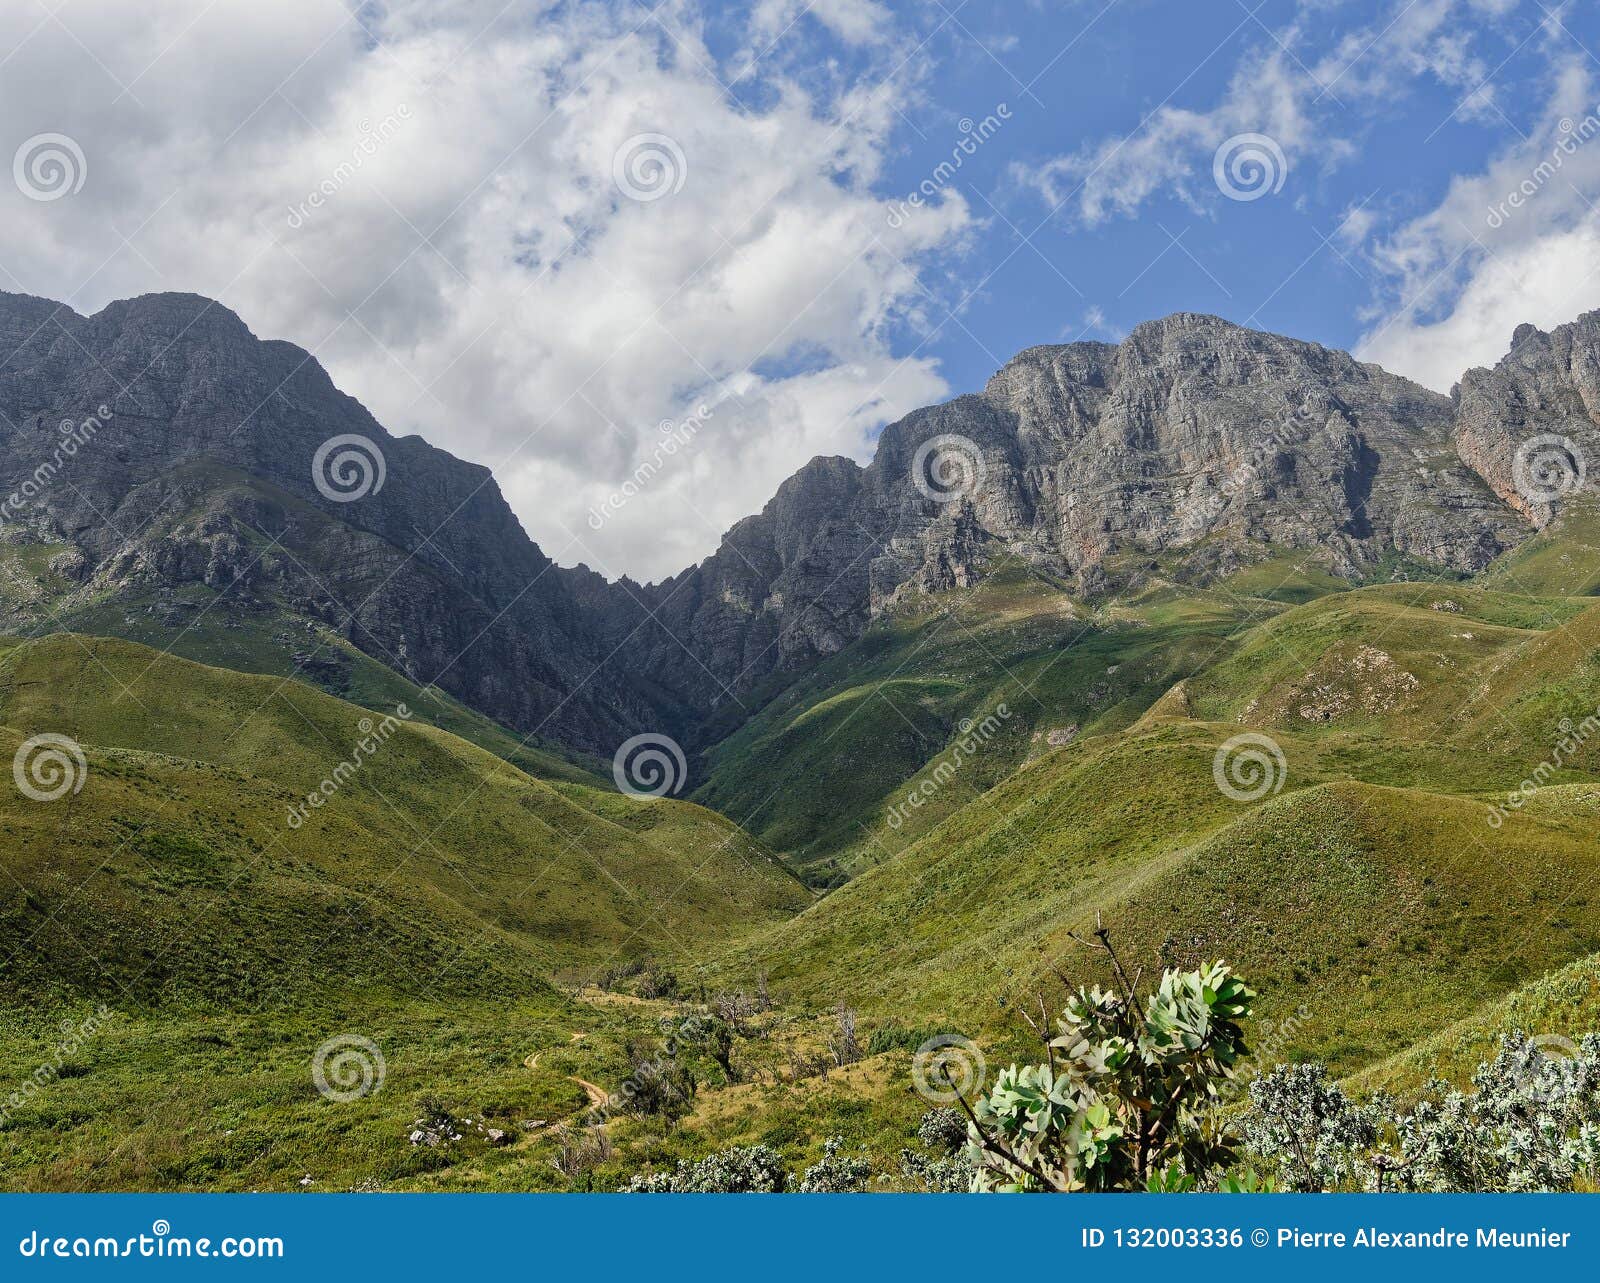 Mountain Peaks in the Clouds Stock Photo - Image of hiking, backdrop ...